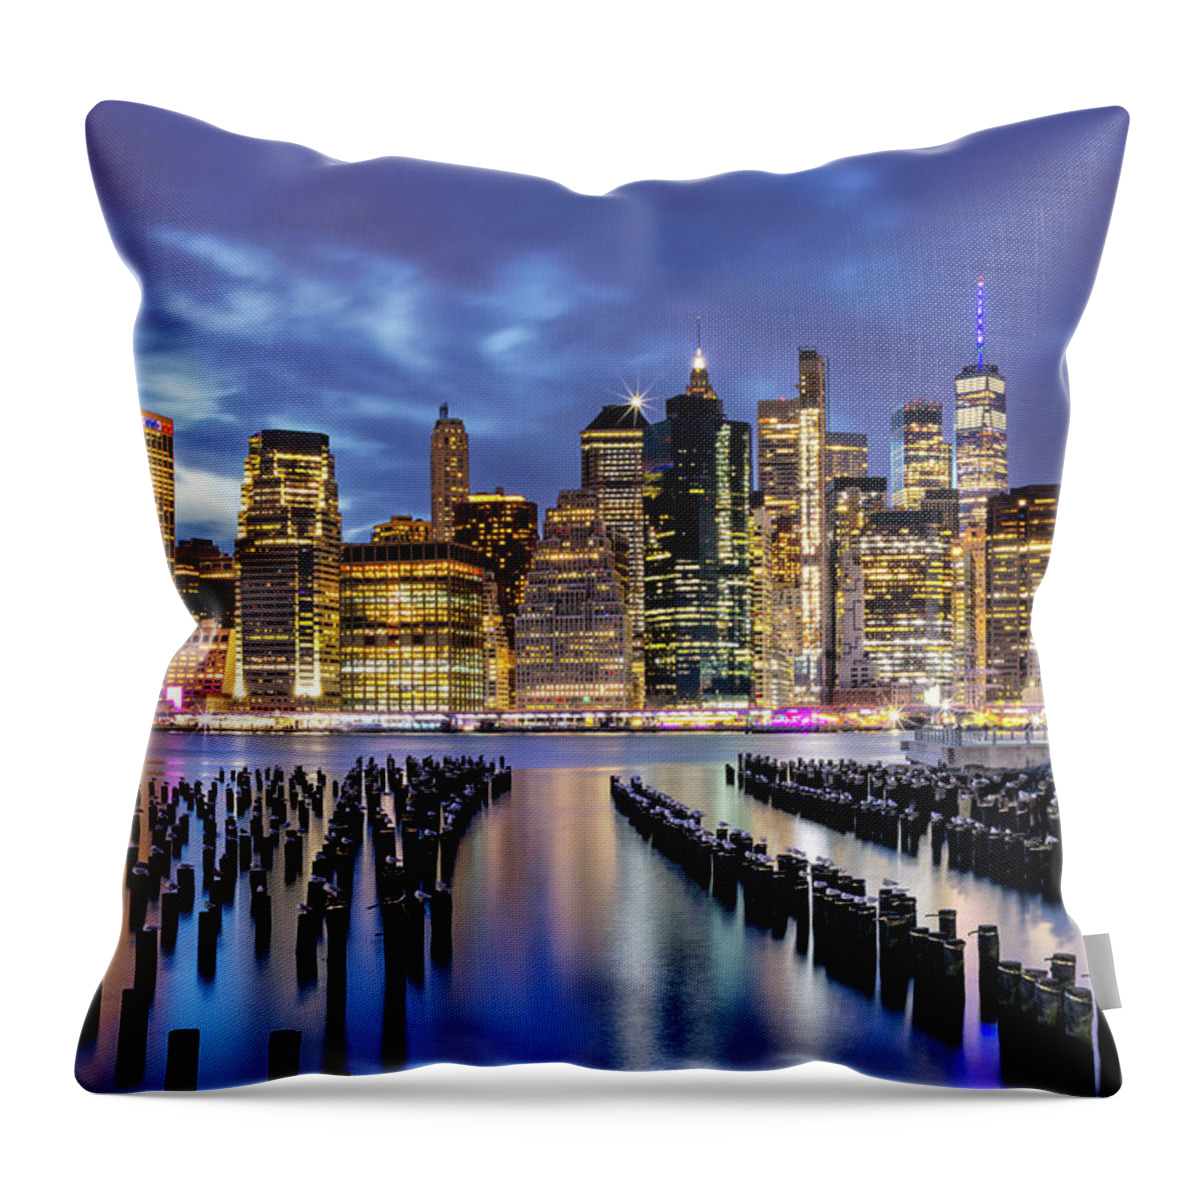 Estock Throw Pillow featuring the digital art New York City, Downtown Skyline Seen From Brooklyn #2 by Lumiere